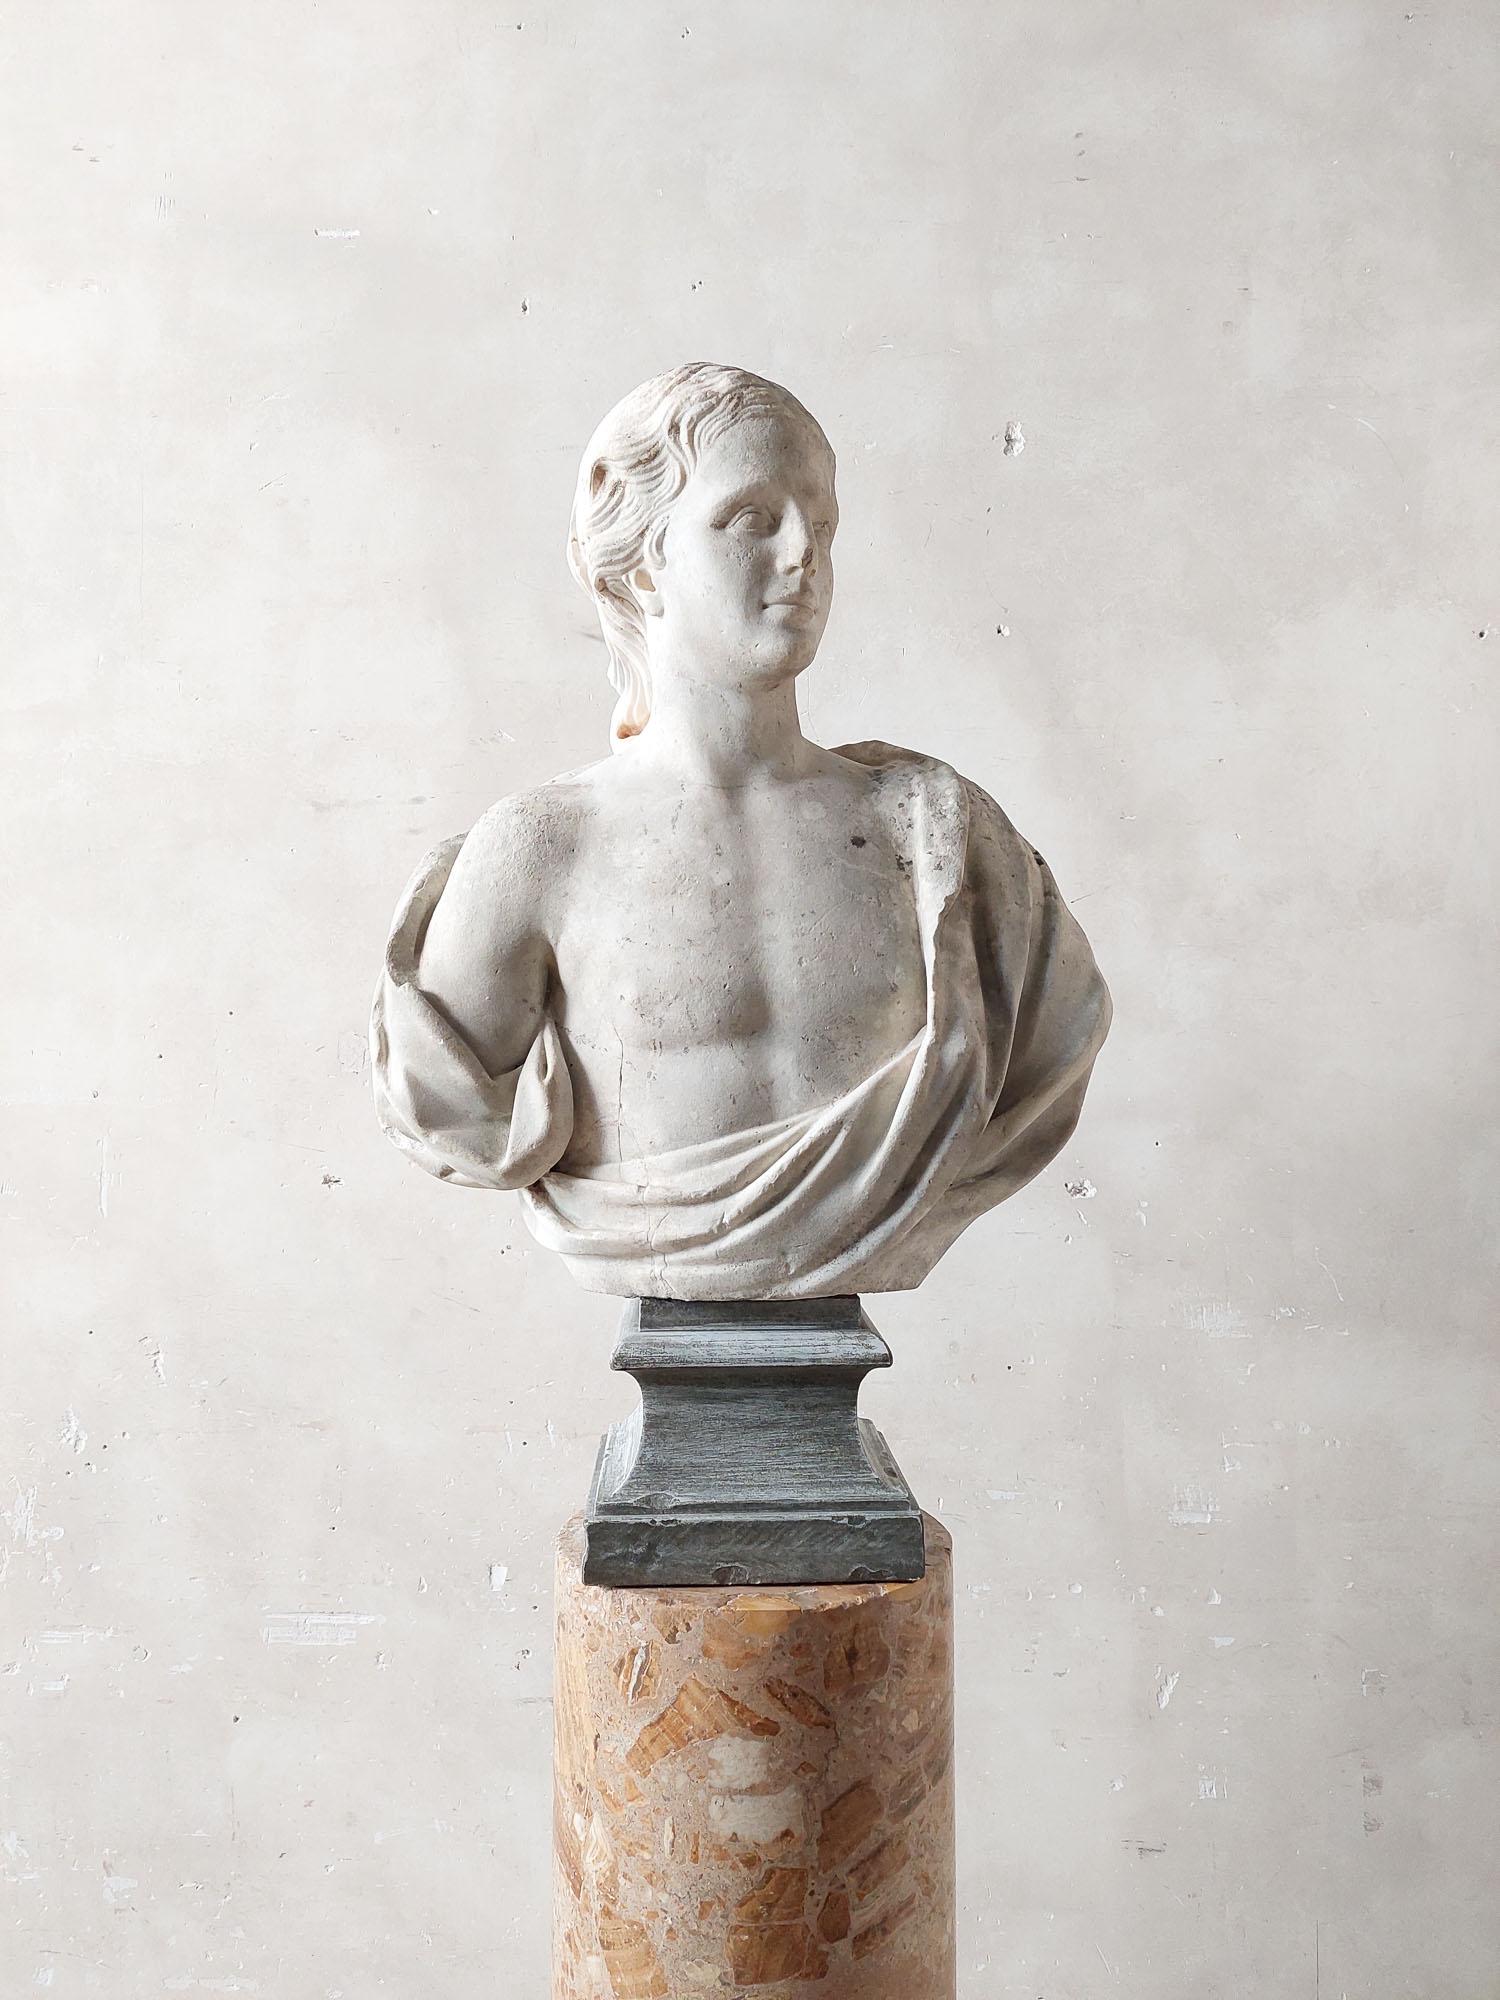 Antique, 17th century hand-carved Carrara marble bust on a square bleu turquin marble base. The back has a nice rough finish, so the handcarved marks are still visible. A restoration has been done at the bottom right of the rear.

Attention: This